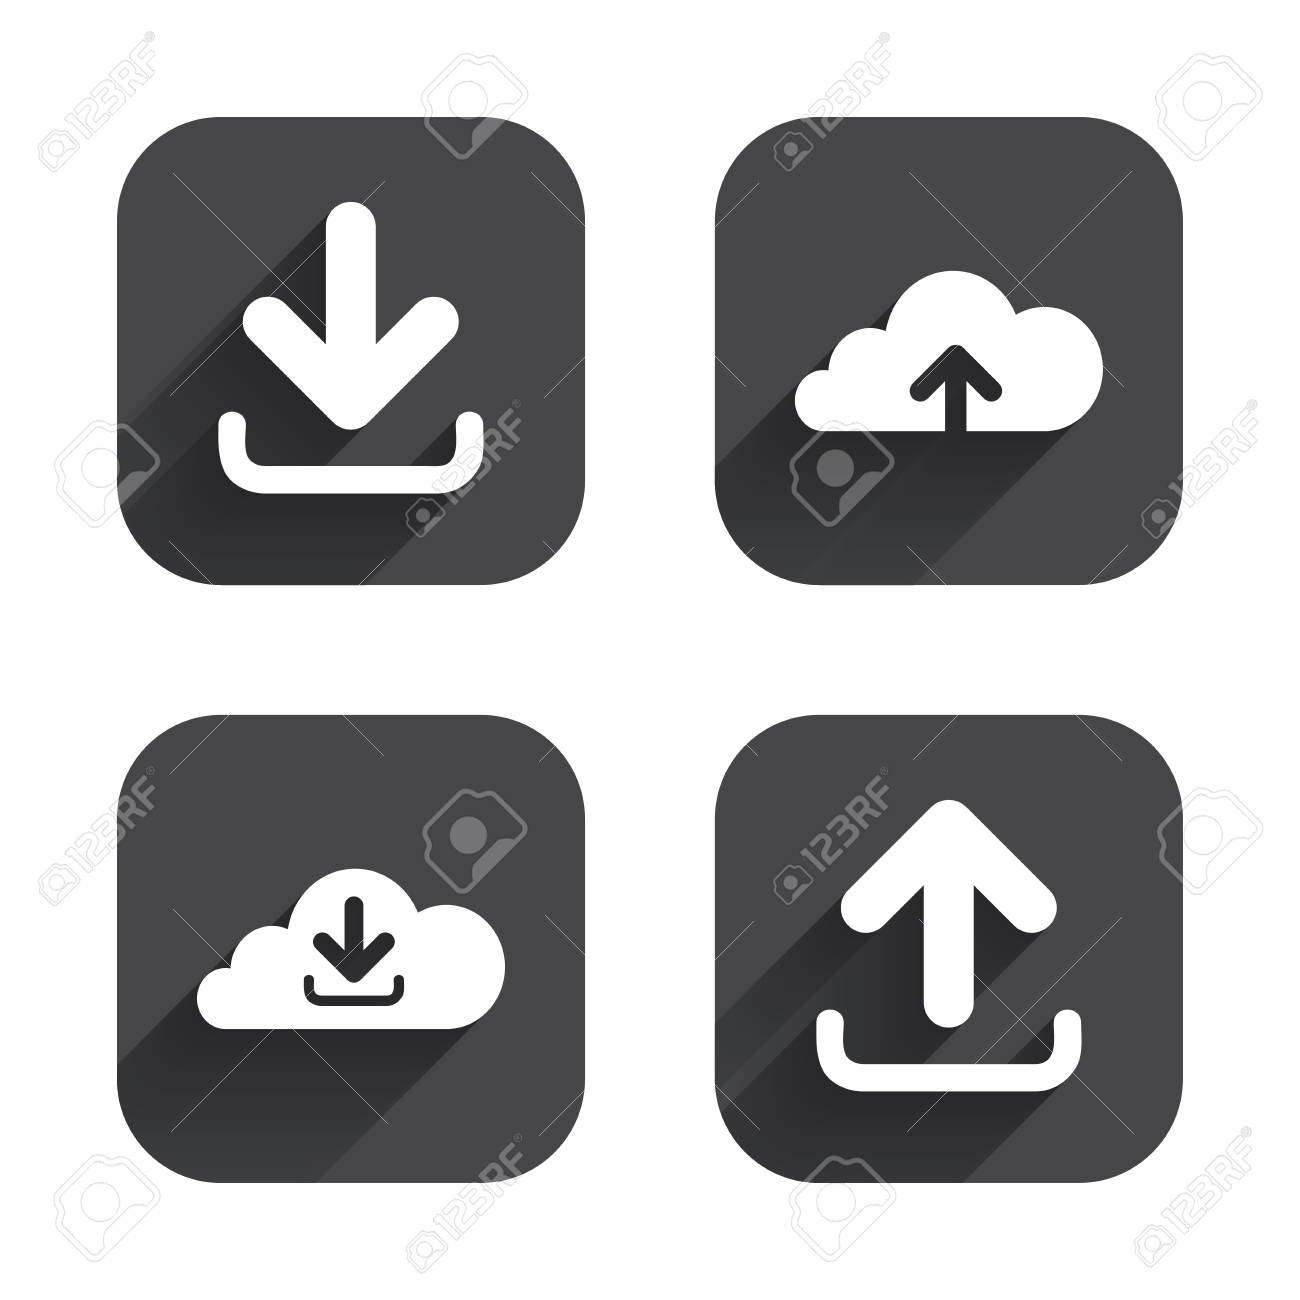 Download Now Button Clipart icons